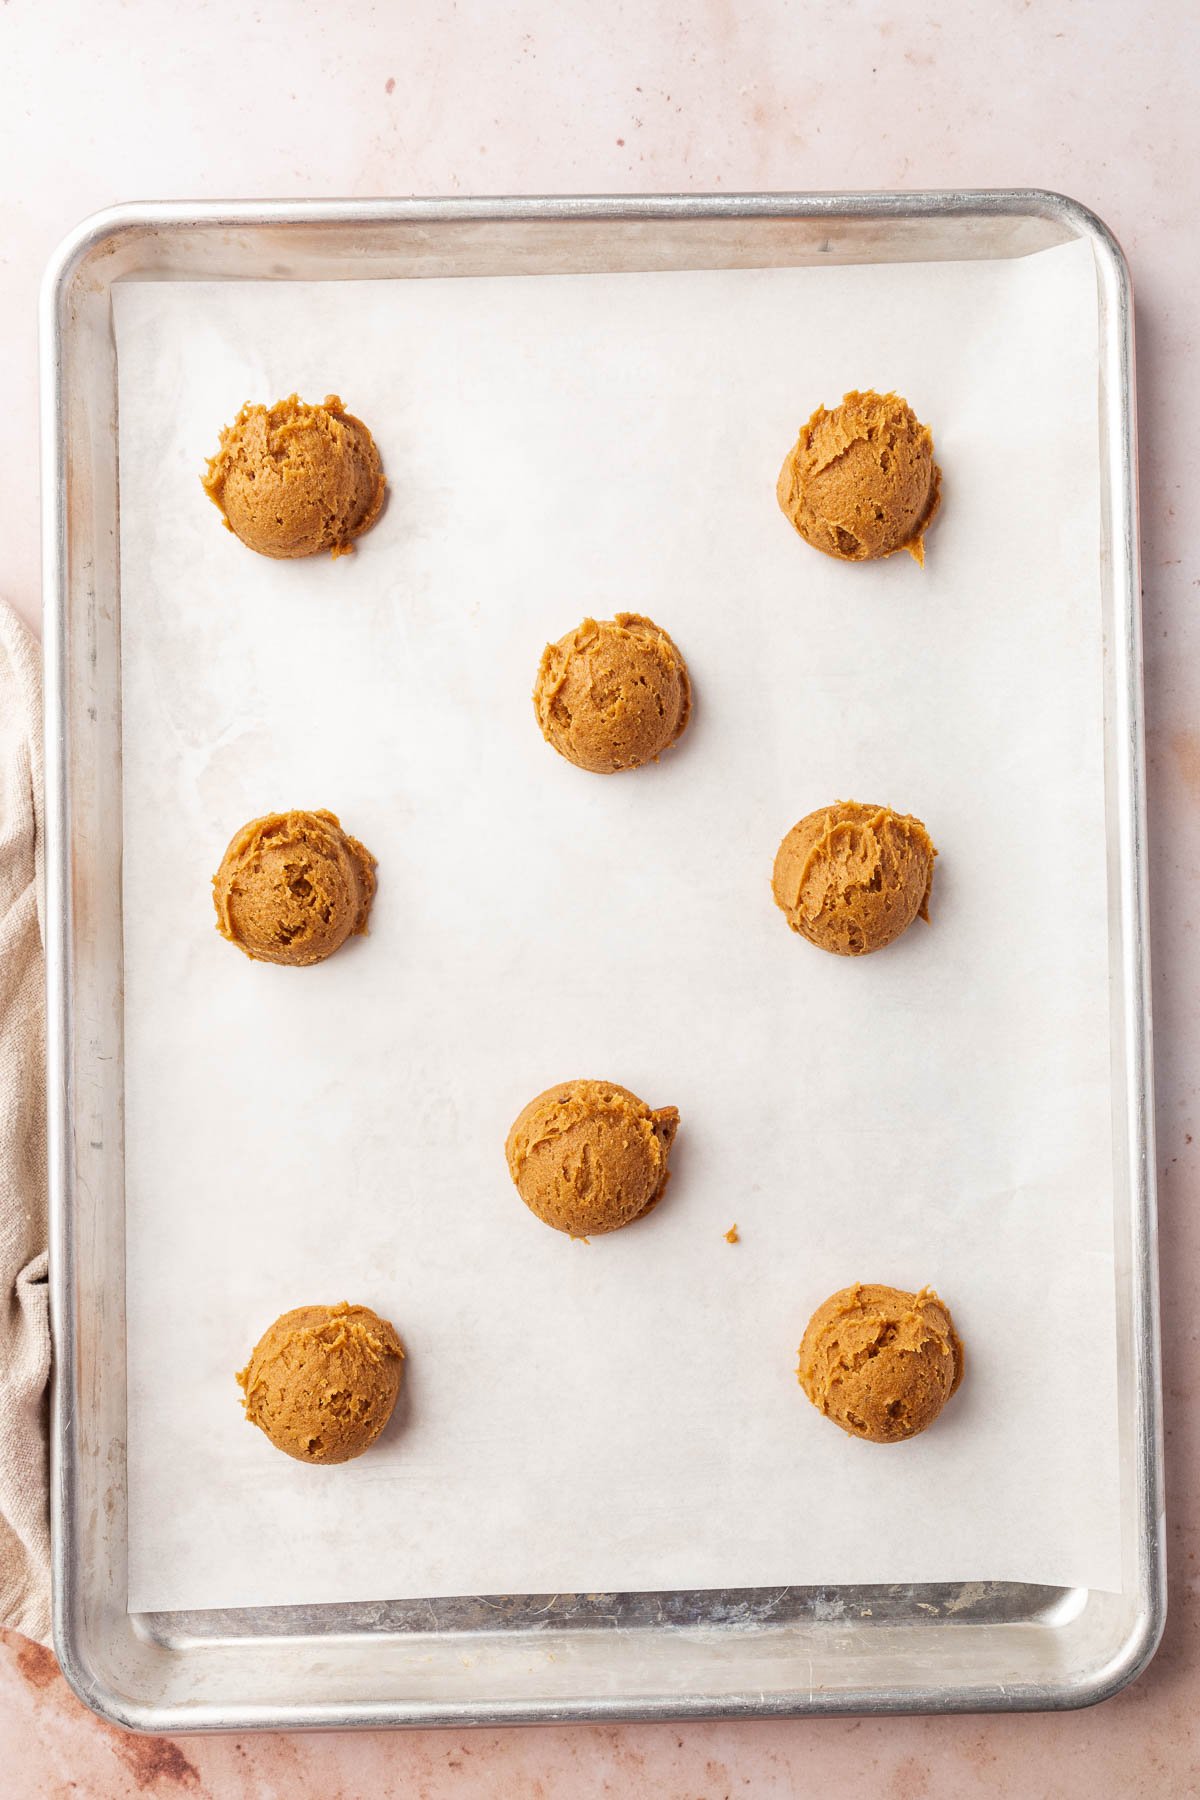 A baking sheet lined with parchment paper and topped with eight gluten-free pumpkin cookie dough balls before baking in the oven.